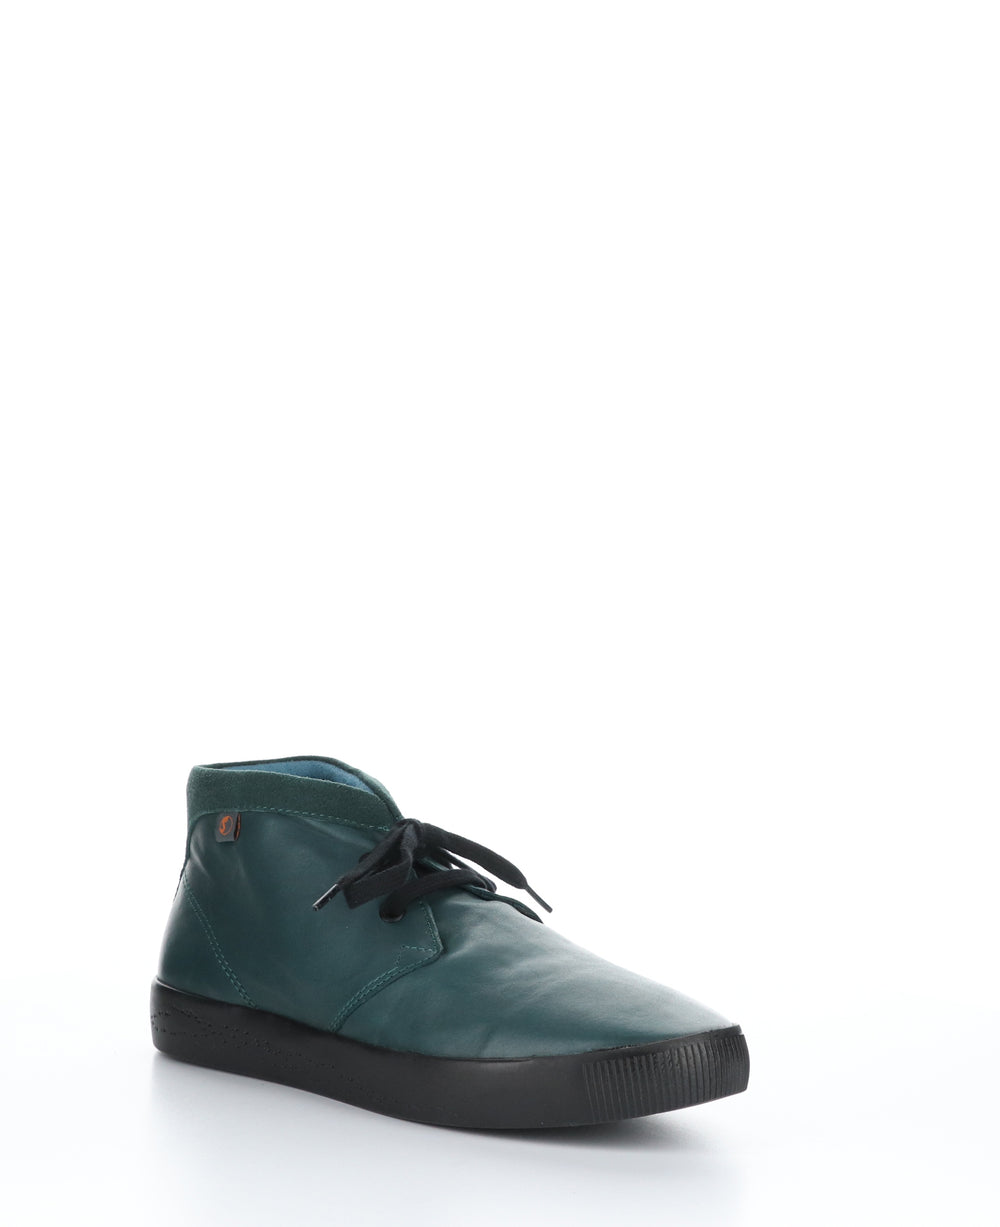 SIAL607SOF Forest Green Round Toe Shoes